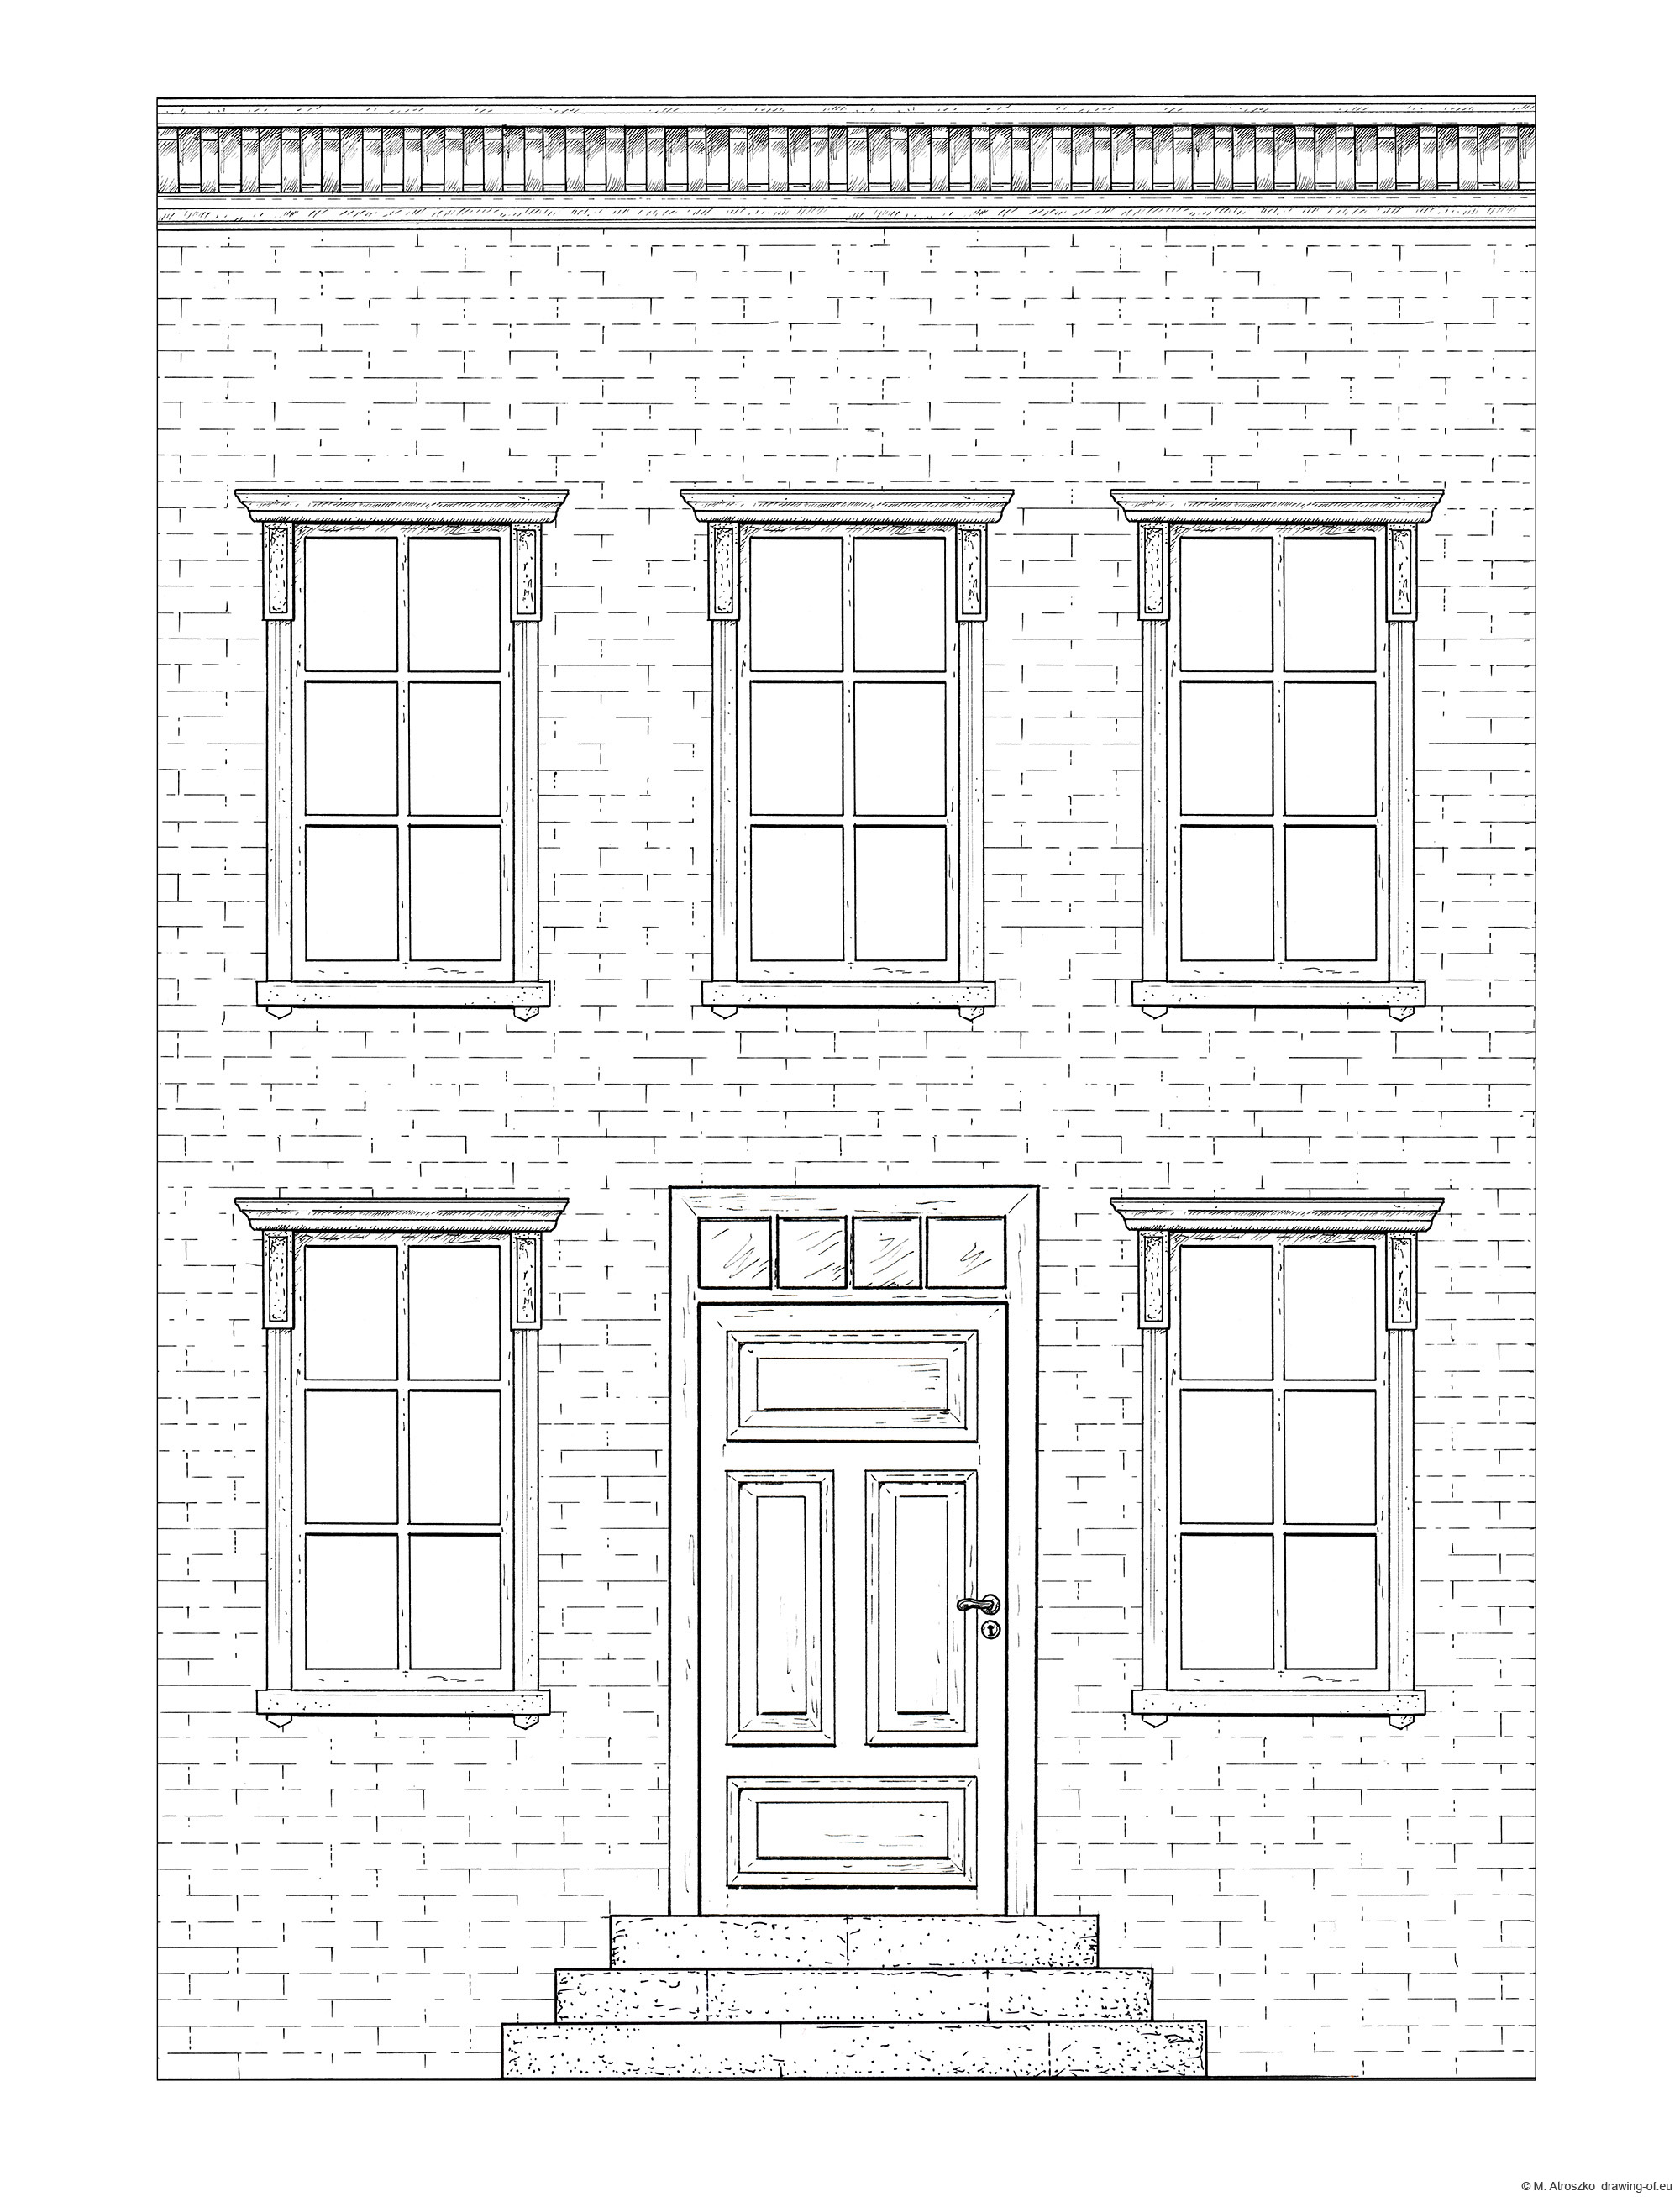 Drawing of building - town house